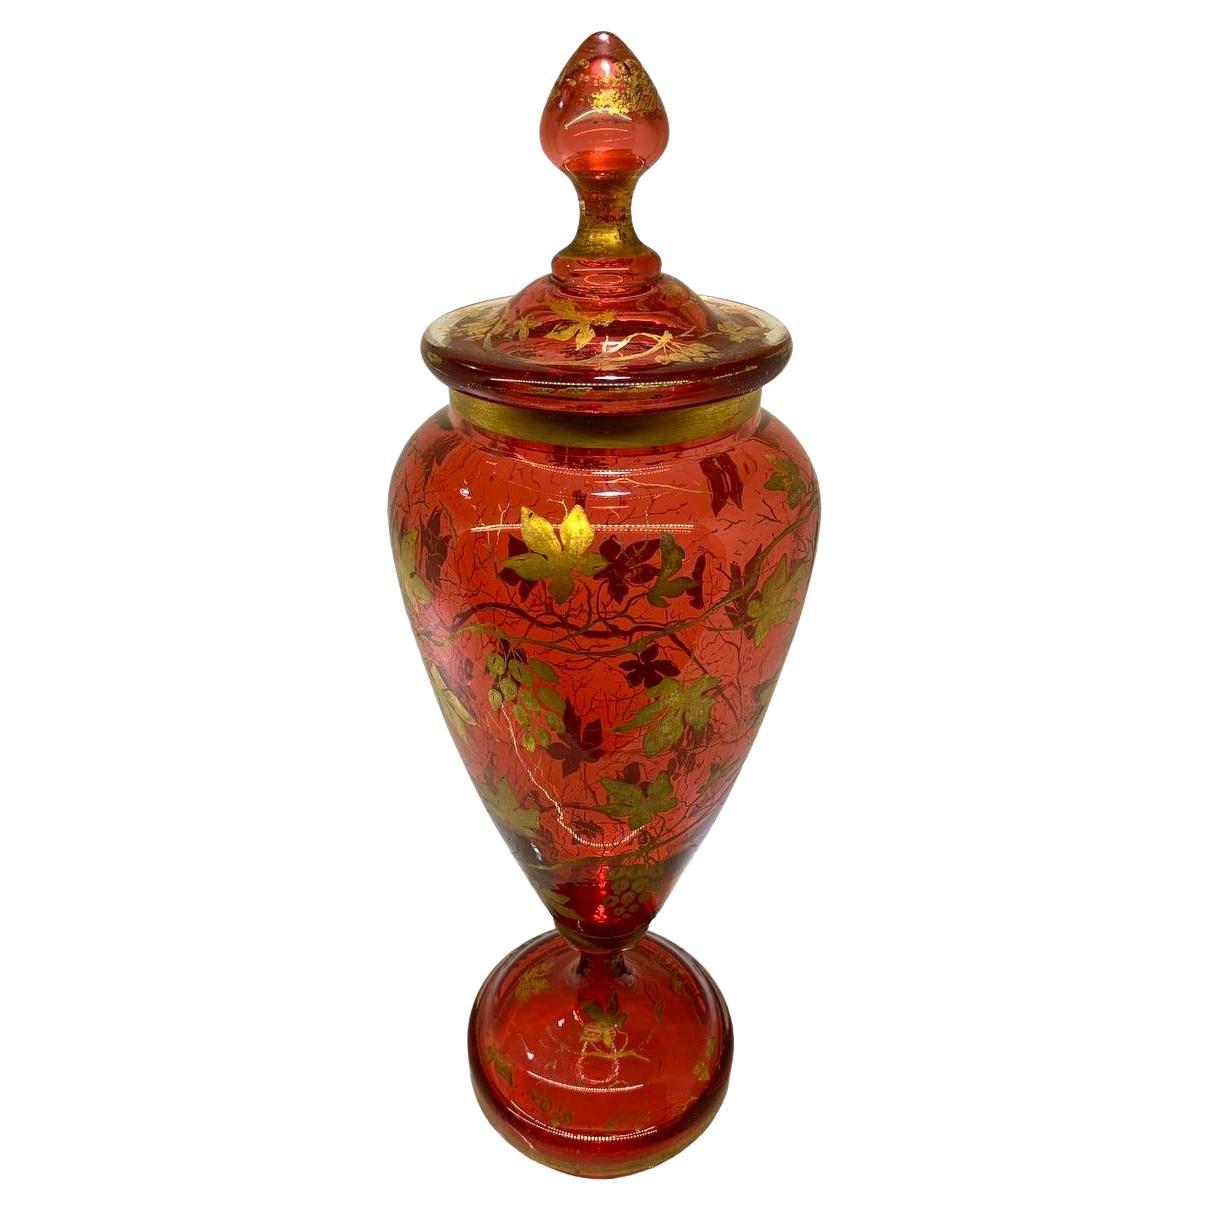 Cranberry glass vase with lid
Rich Gold Enamel Decoration all around the circular body featuring Vines
Further Gilding highlights on the rim, base and lid
Bohemia, 19th Century.